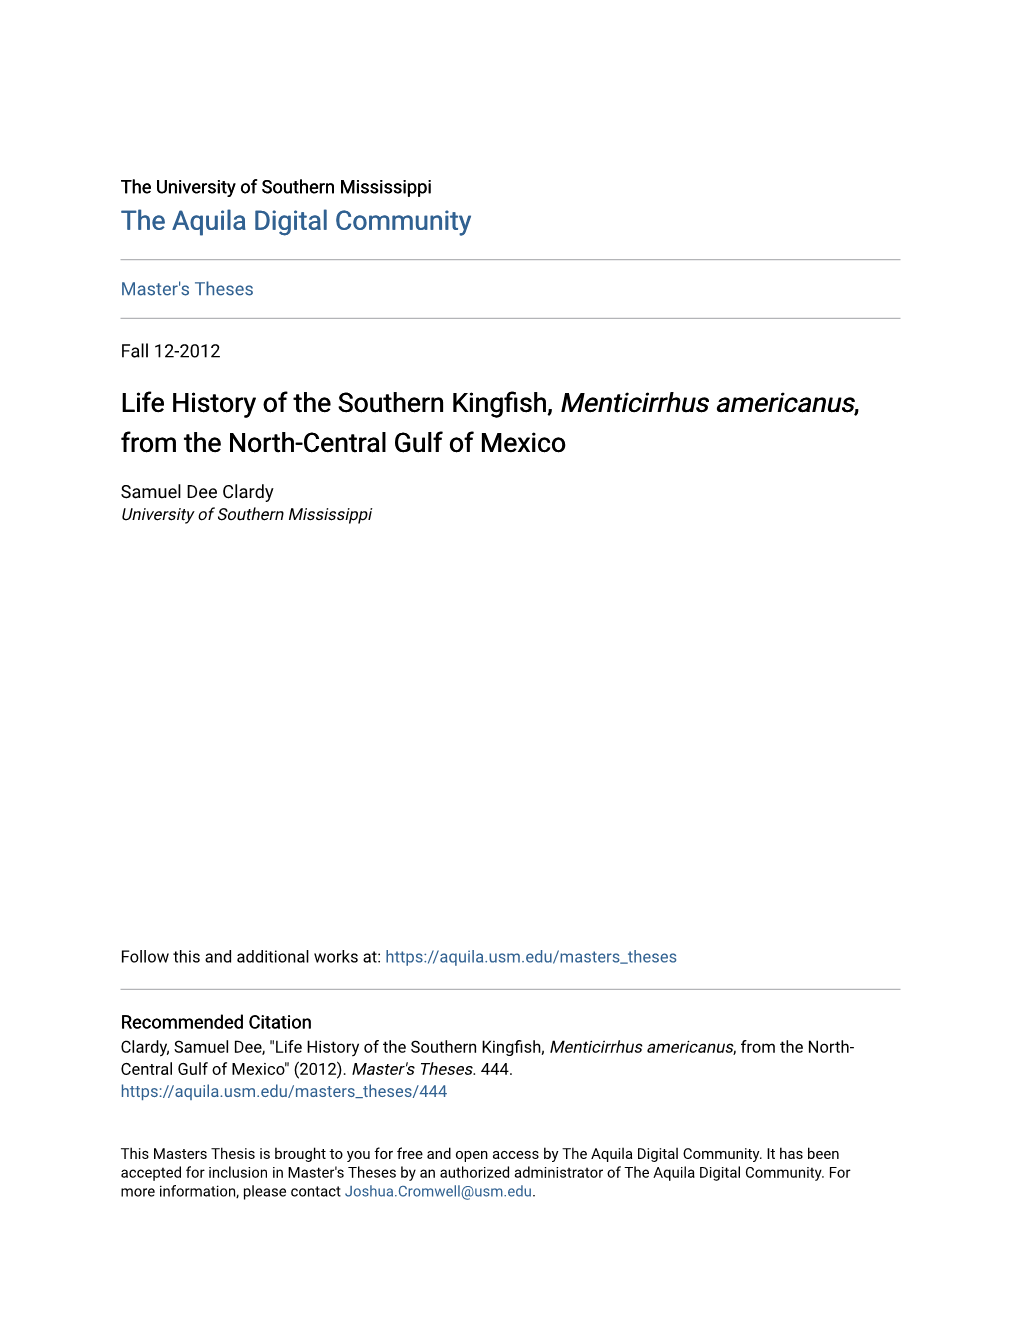 Life History of the Southern Kingfish, Menticirrhus Americanus, from the North-Central Gulf of Mexico